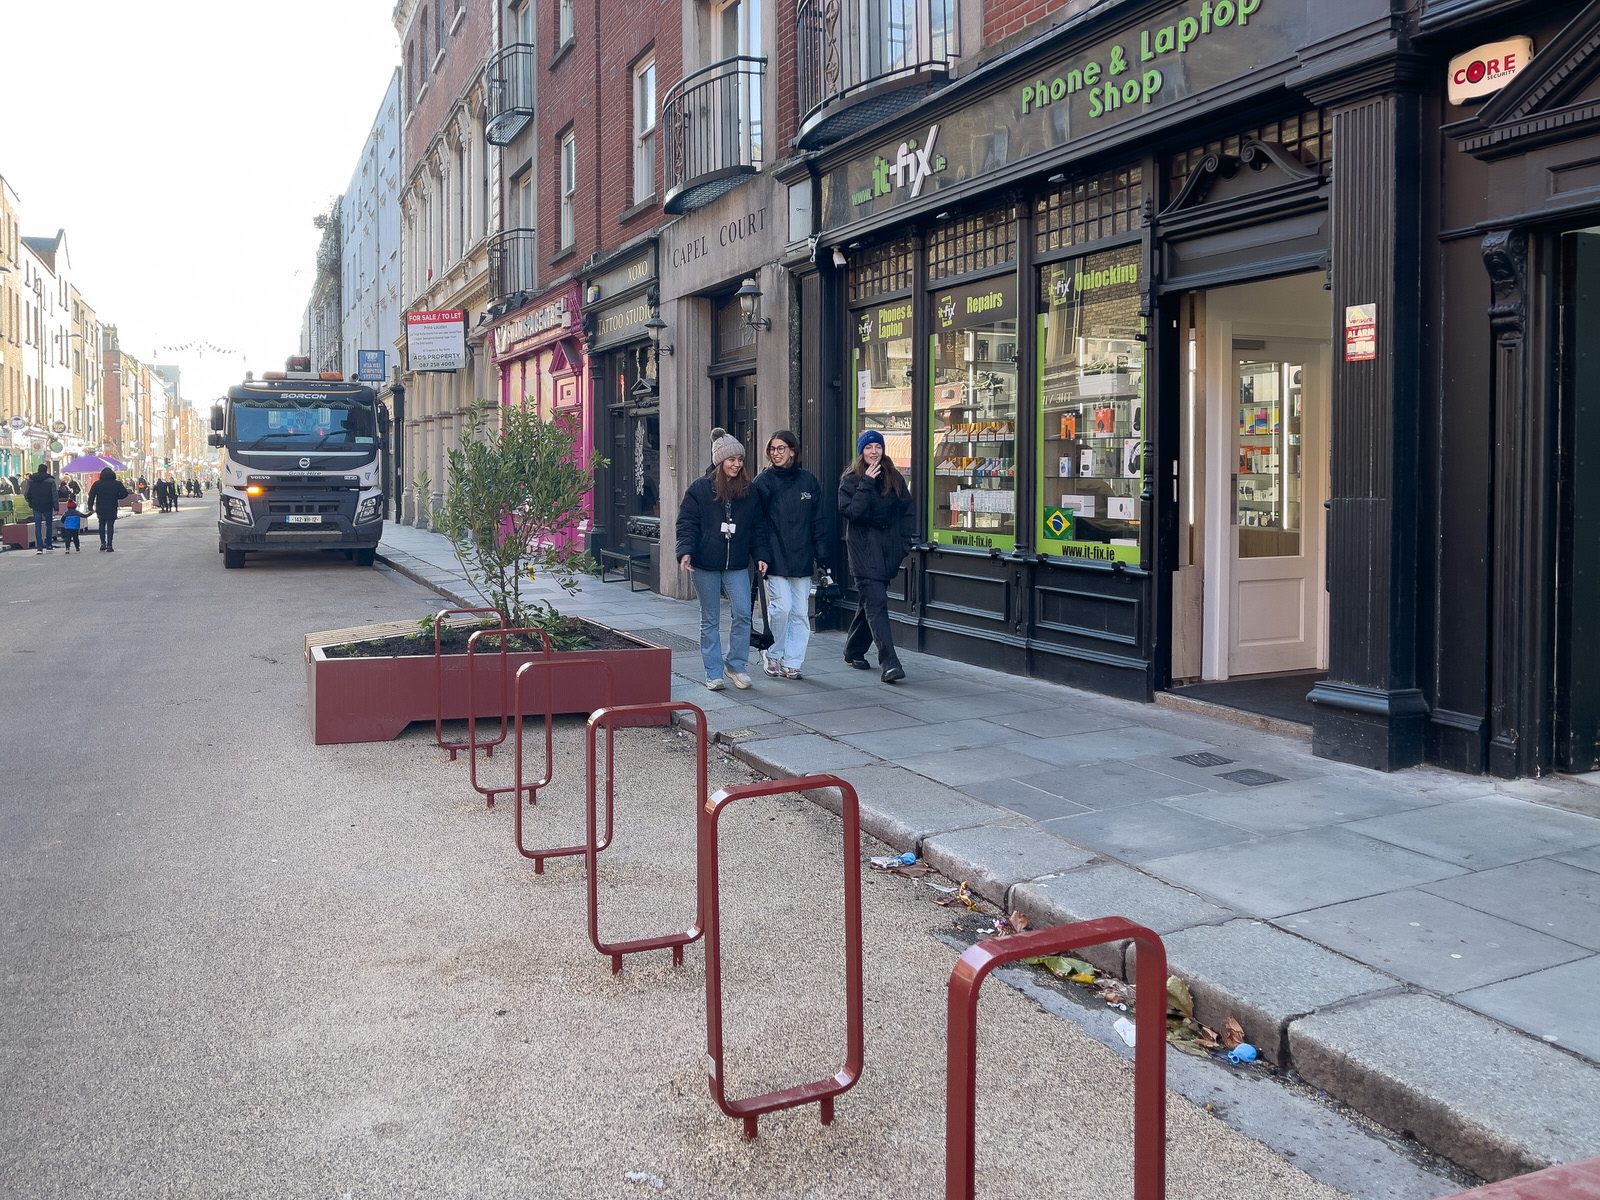 THE NEW STREET FURNITURE AND THE CHRISTMAS TREE [HAVE ARRIVED IN CAPEL STREET]-225854-1